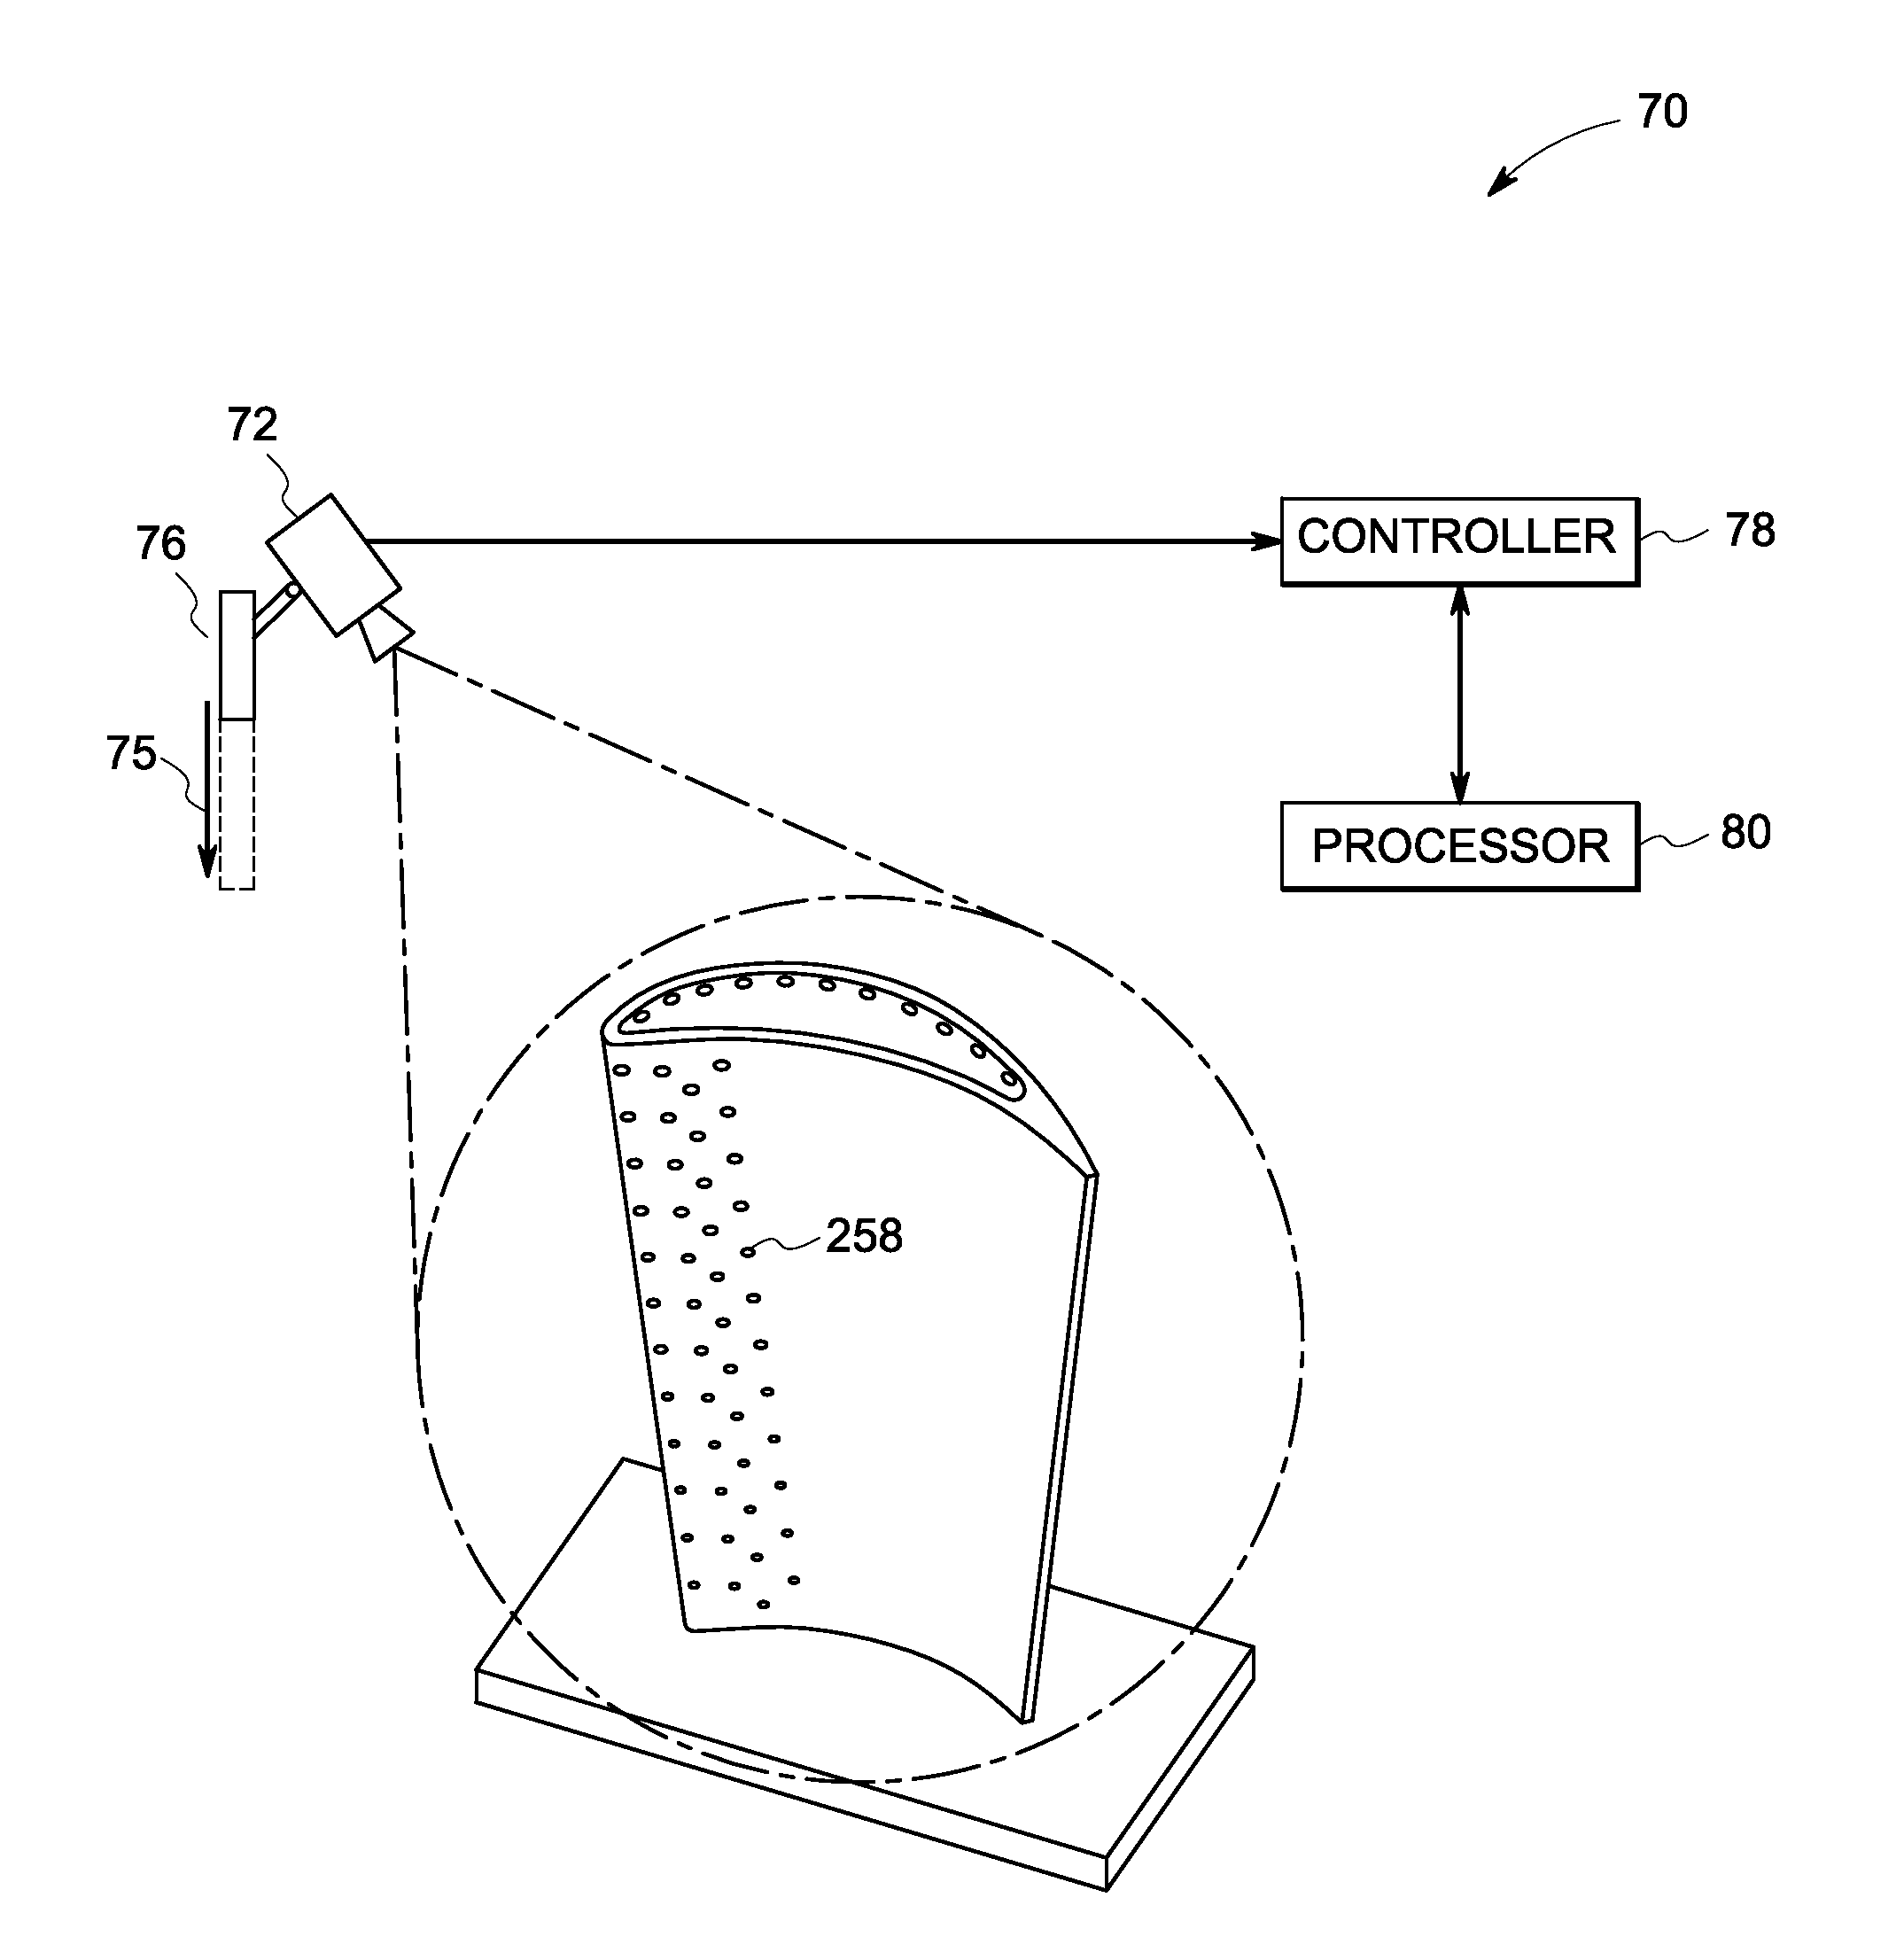 Online systems and methods for thermal inspection of parts